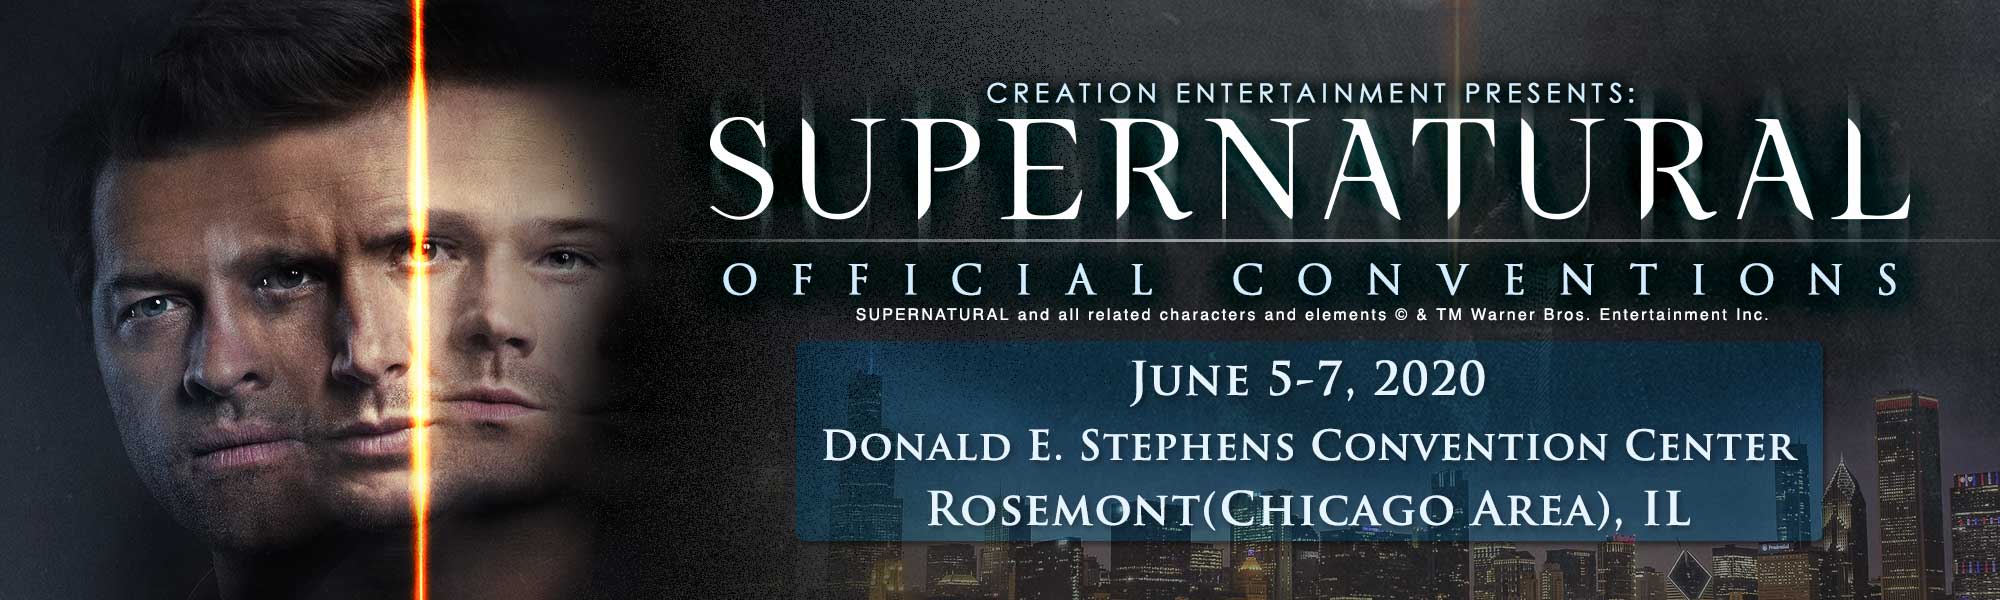 Creation Entertainment's Supernatural Offical Convention in Rosemont